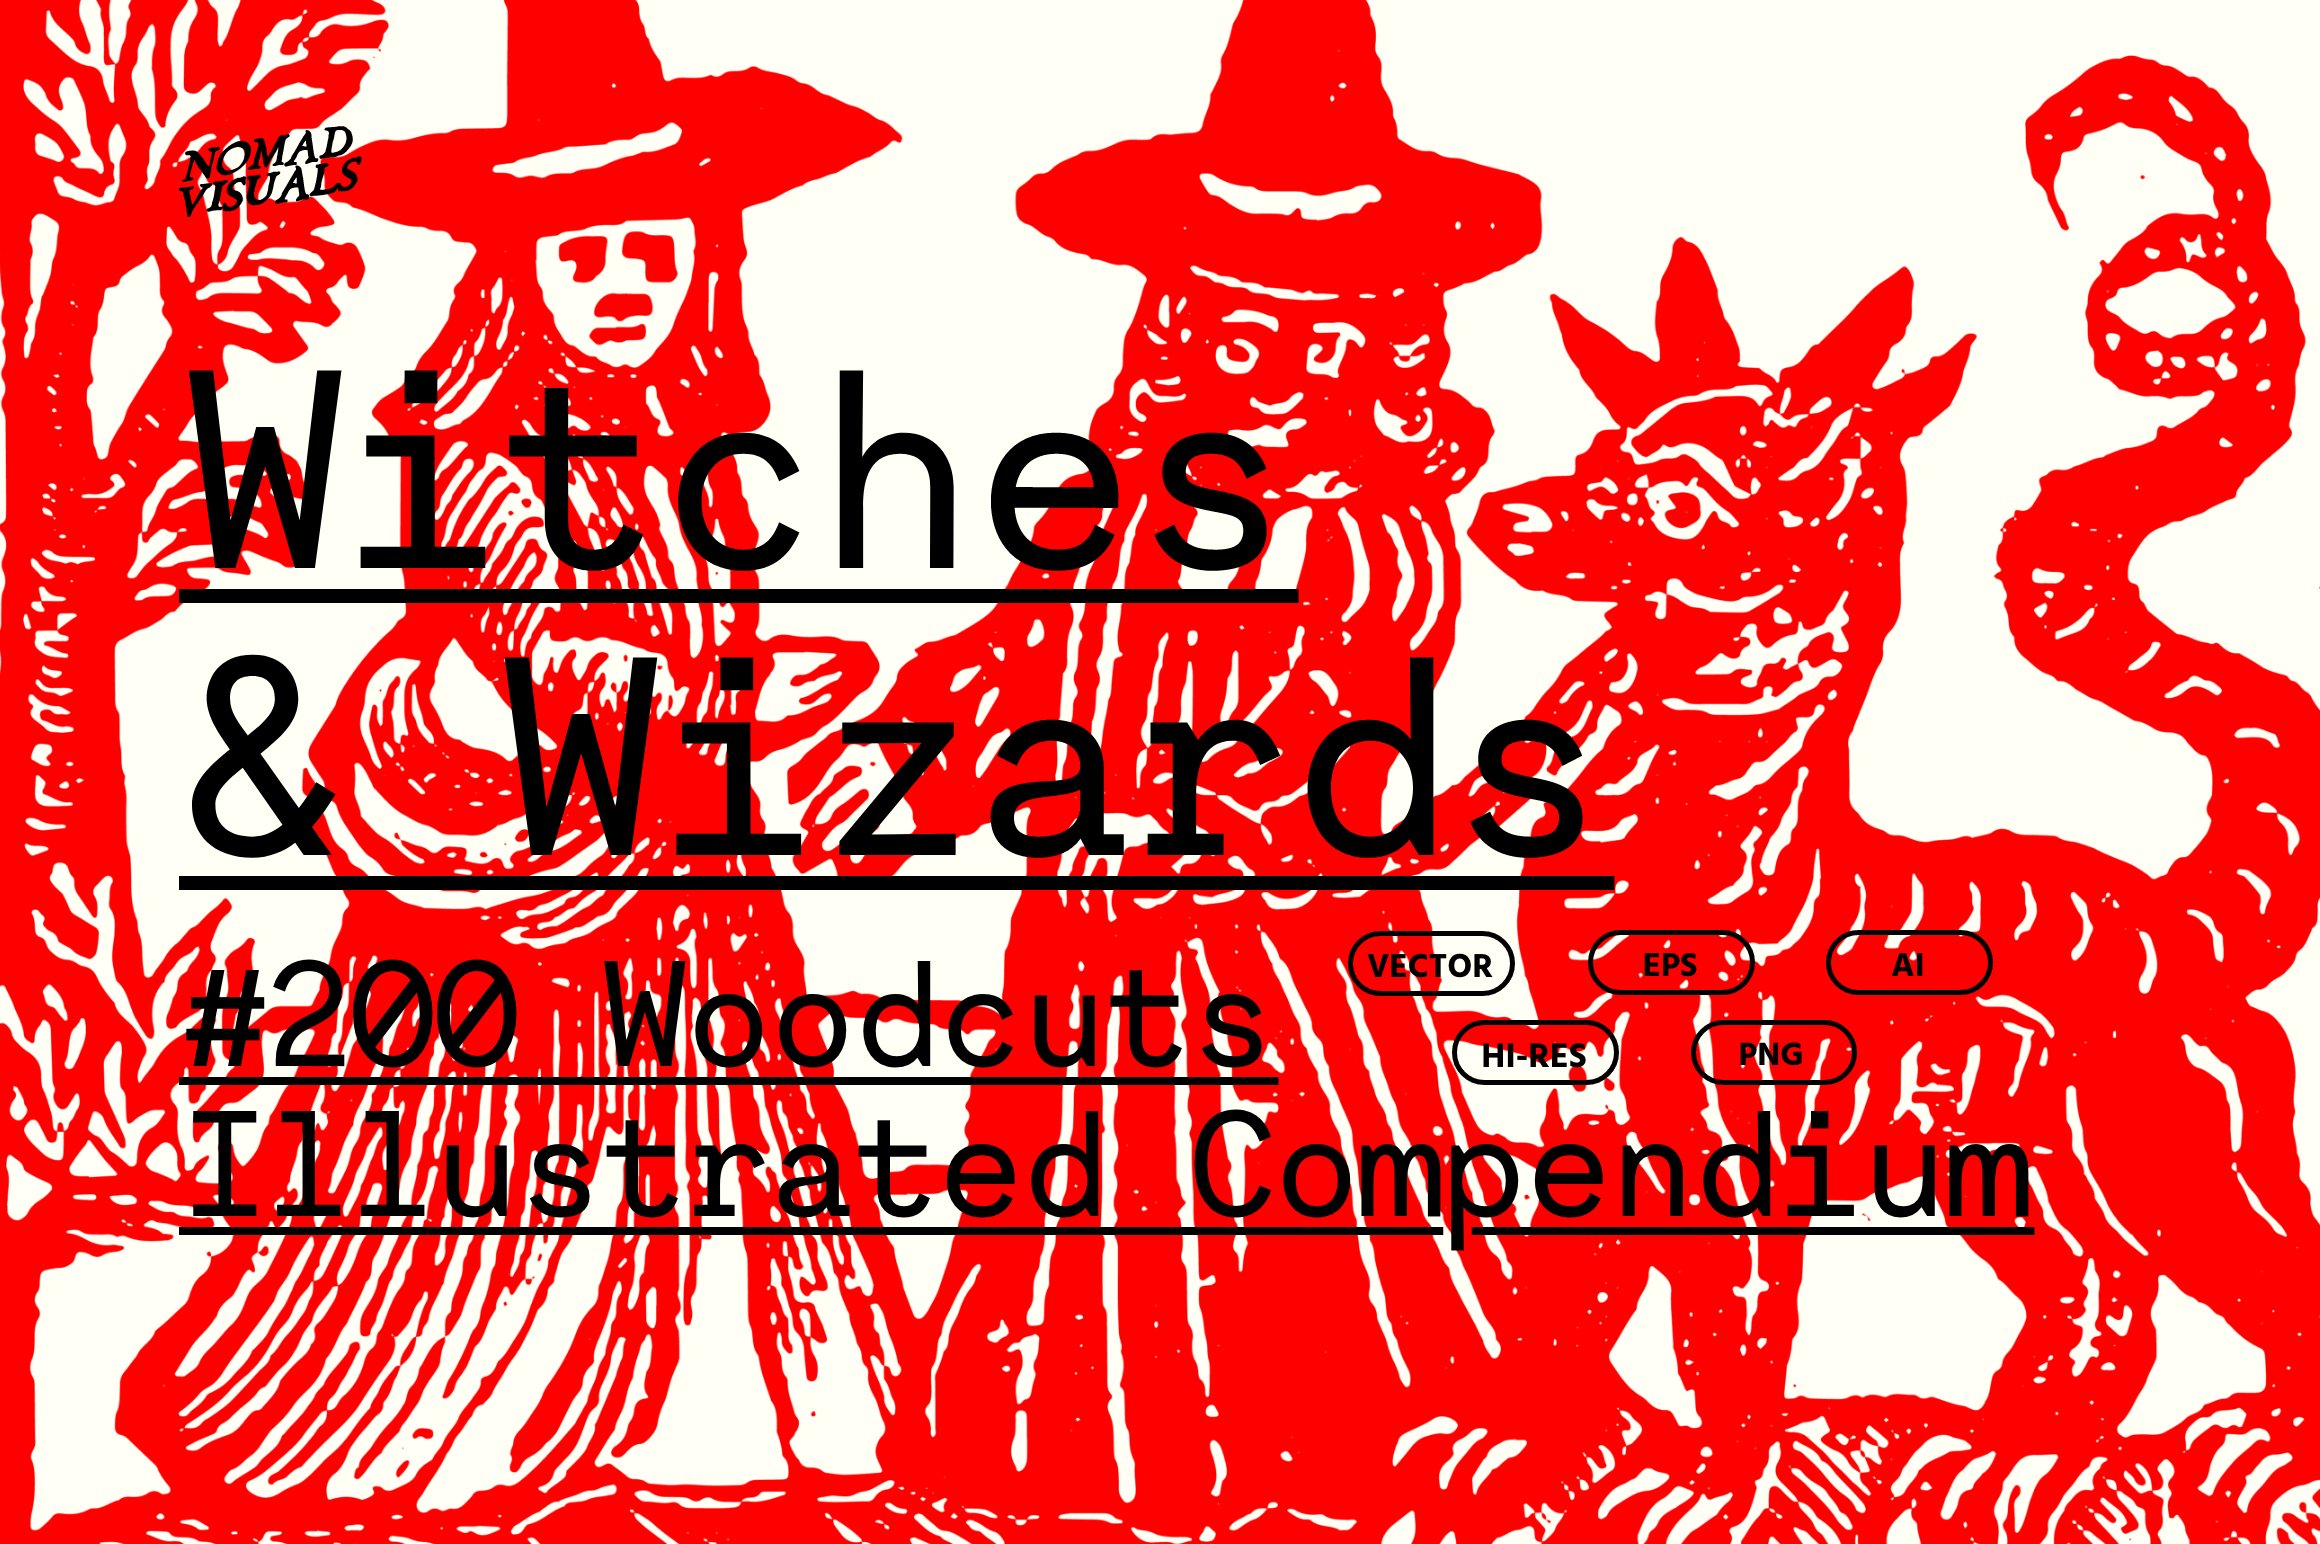 Witches & Wizards cover image.